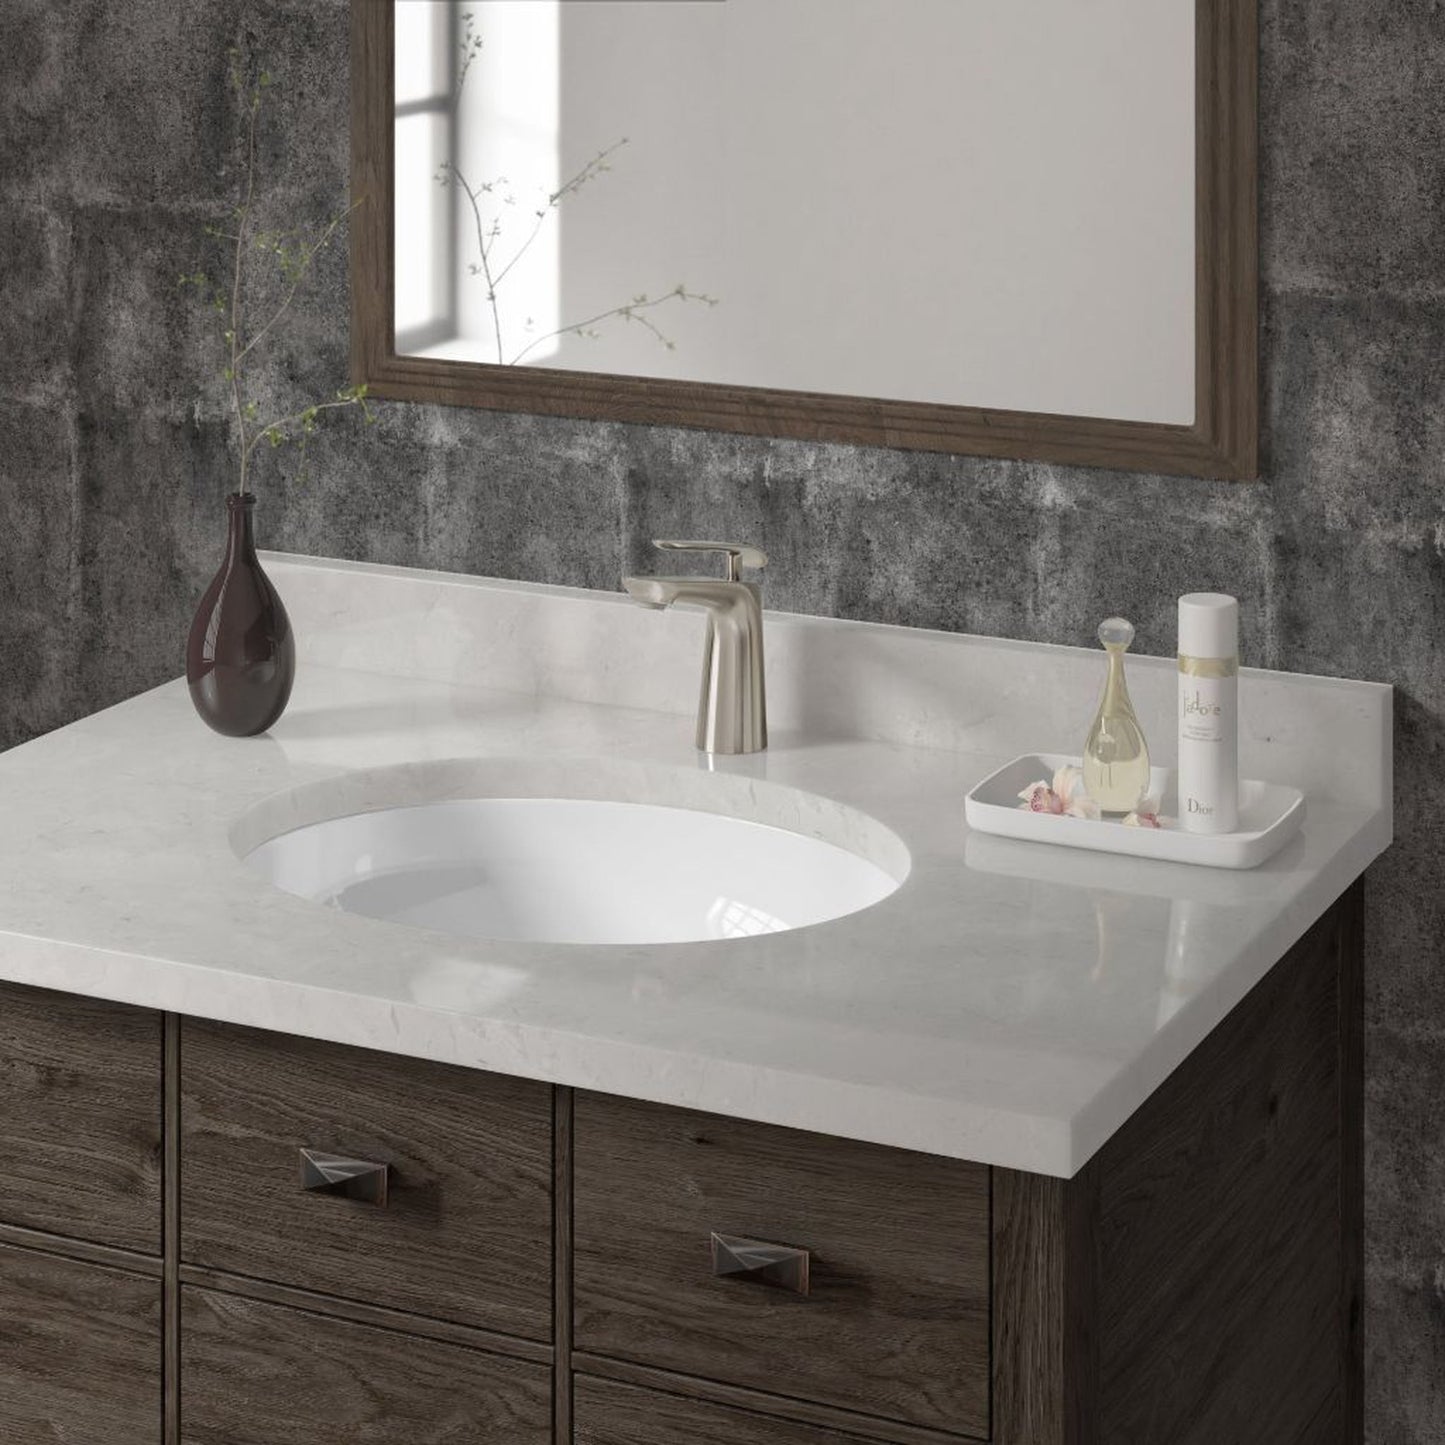 Allora USA 19.5" X 16" Vitreous China White Oval Porcelain Undermount Sink with Overflow